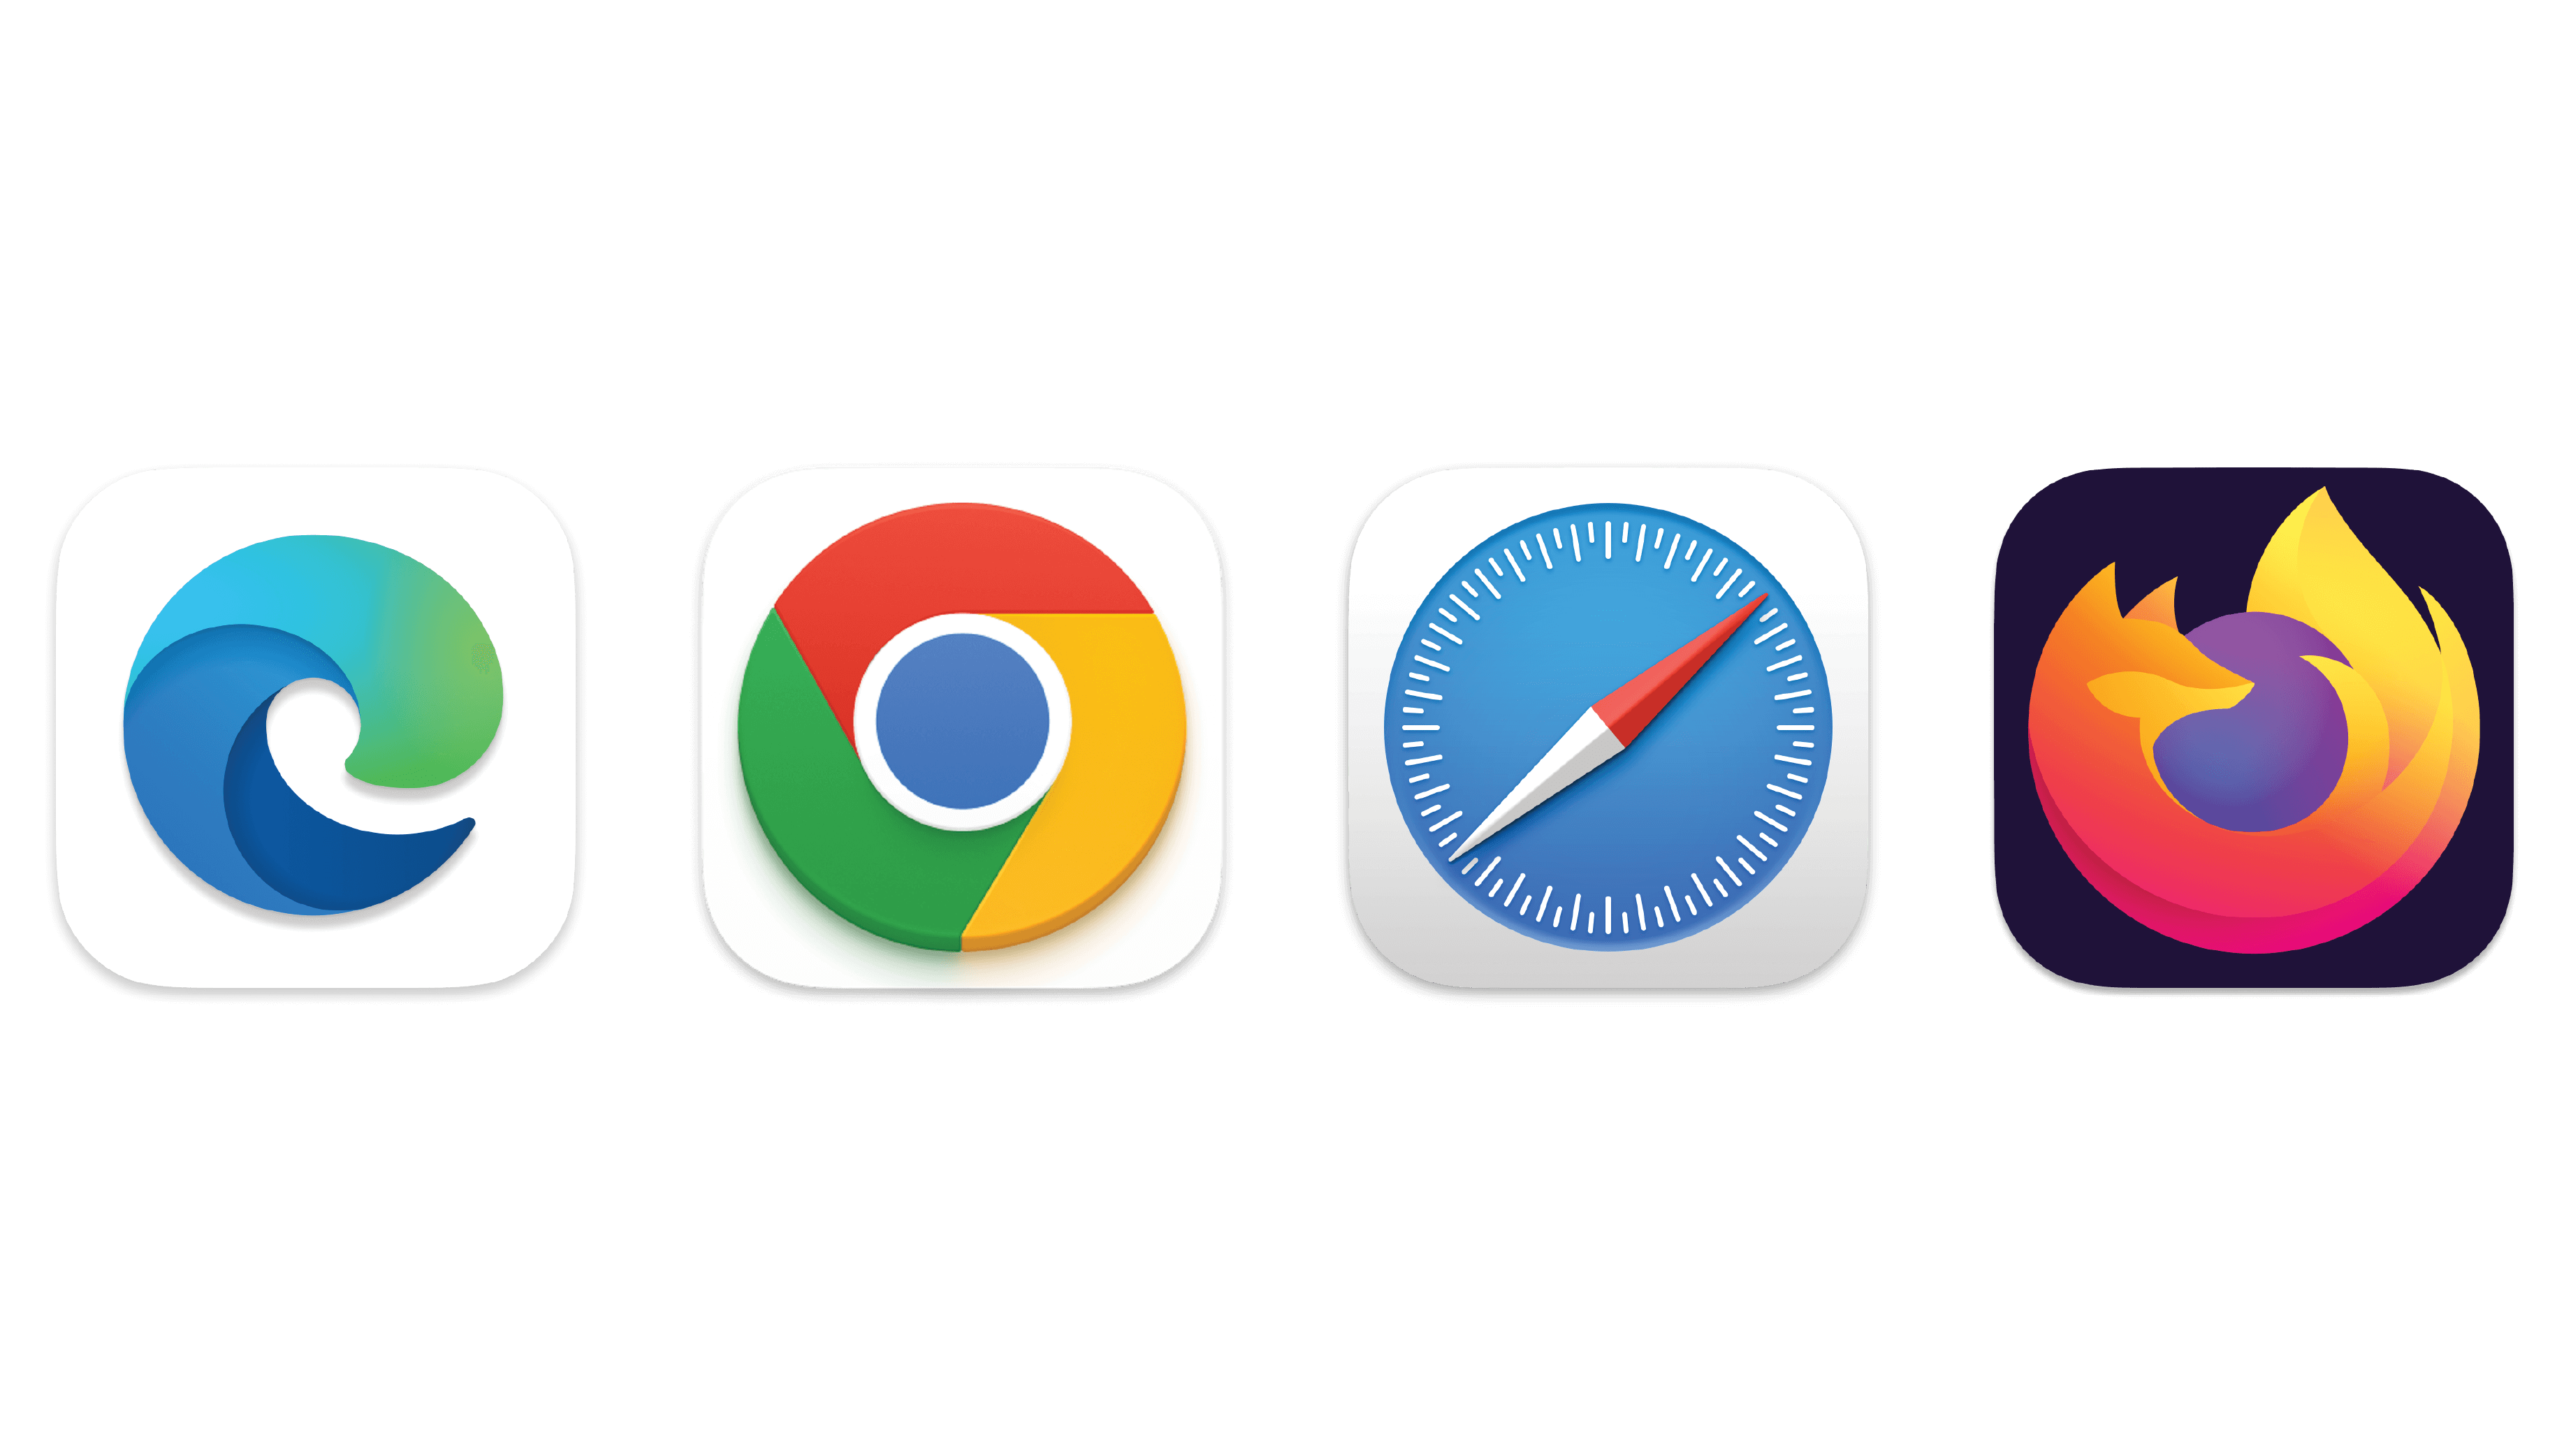 Turnkey_Browser_Extensions-For_Every_Major_Browser app icons from left to right Microsoft Edge, Chrome, Safari, and Firefox